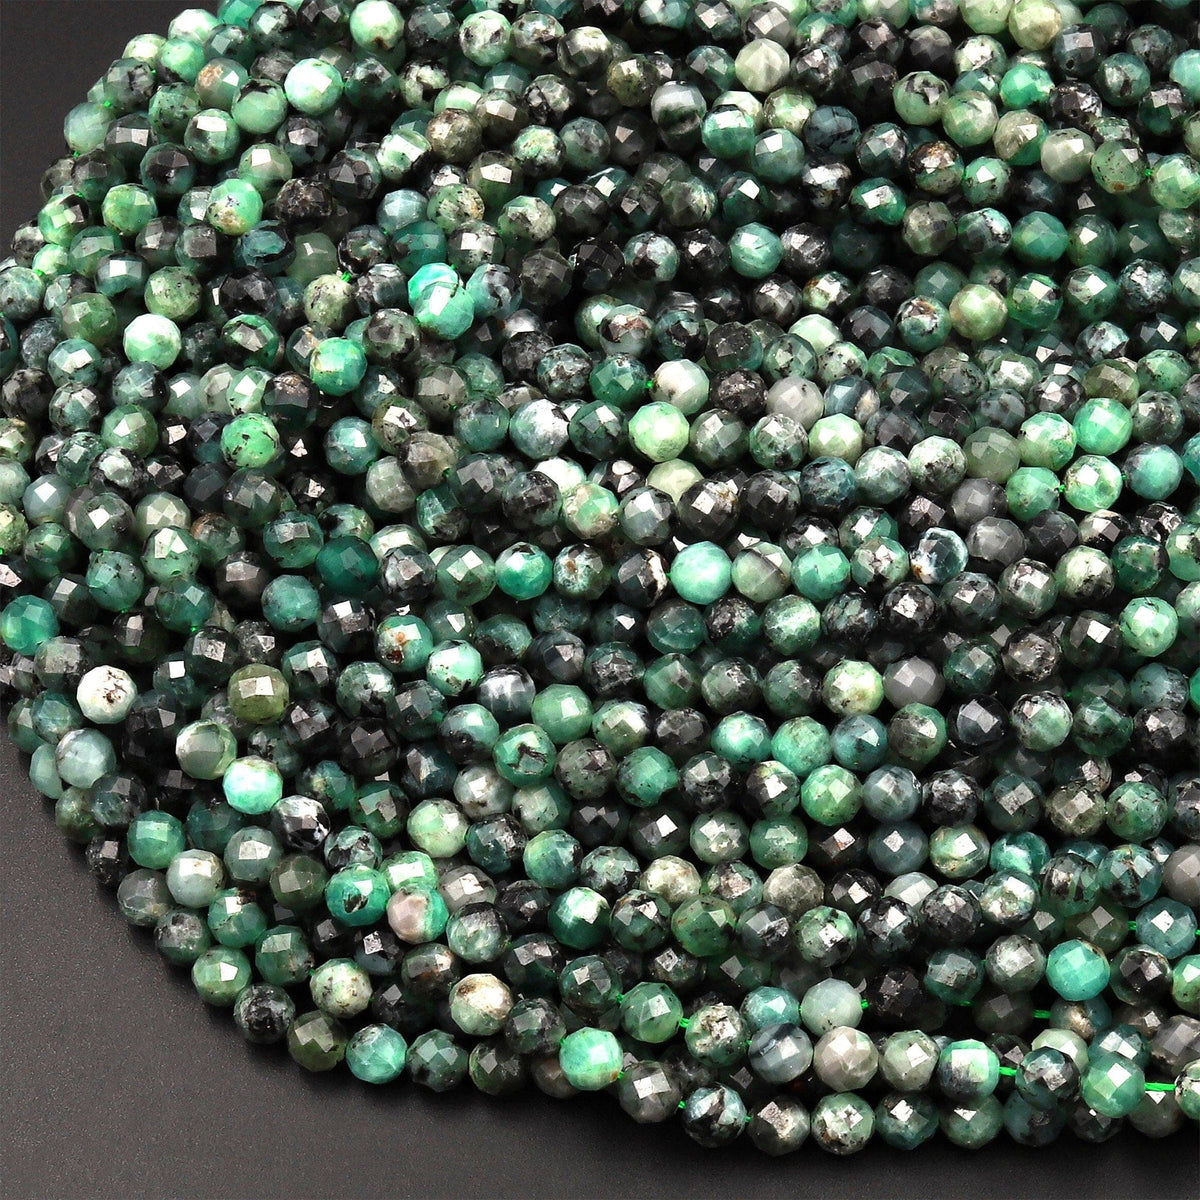 Natural Emerald Faceted Box Gemstone Beads, 4 Mm Emerald Cube Strand,  Emerald Loose Beads, 12.5 Inches DIY Bracelet Making Beads 